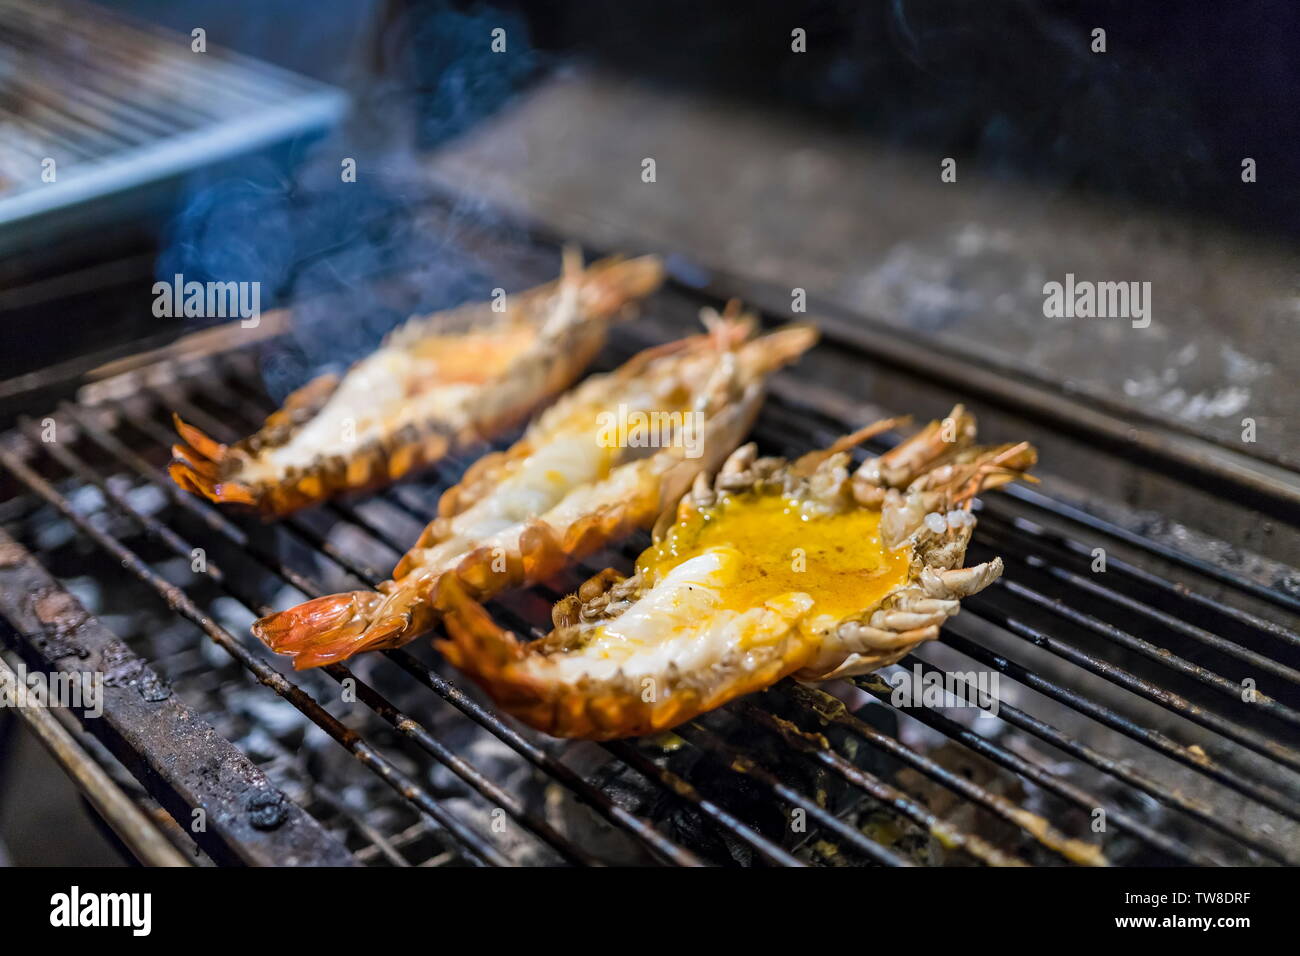 3 Large shrimps grilling on the grill. Smoke rising at night. Favorite Thai food. Selective focus. Stock Photo